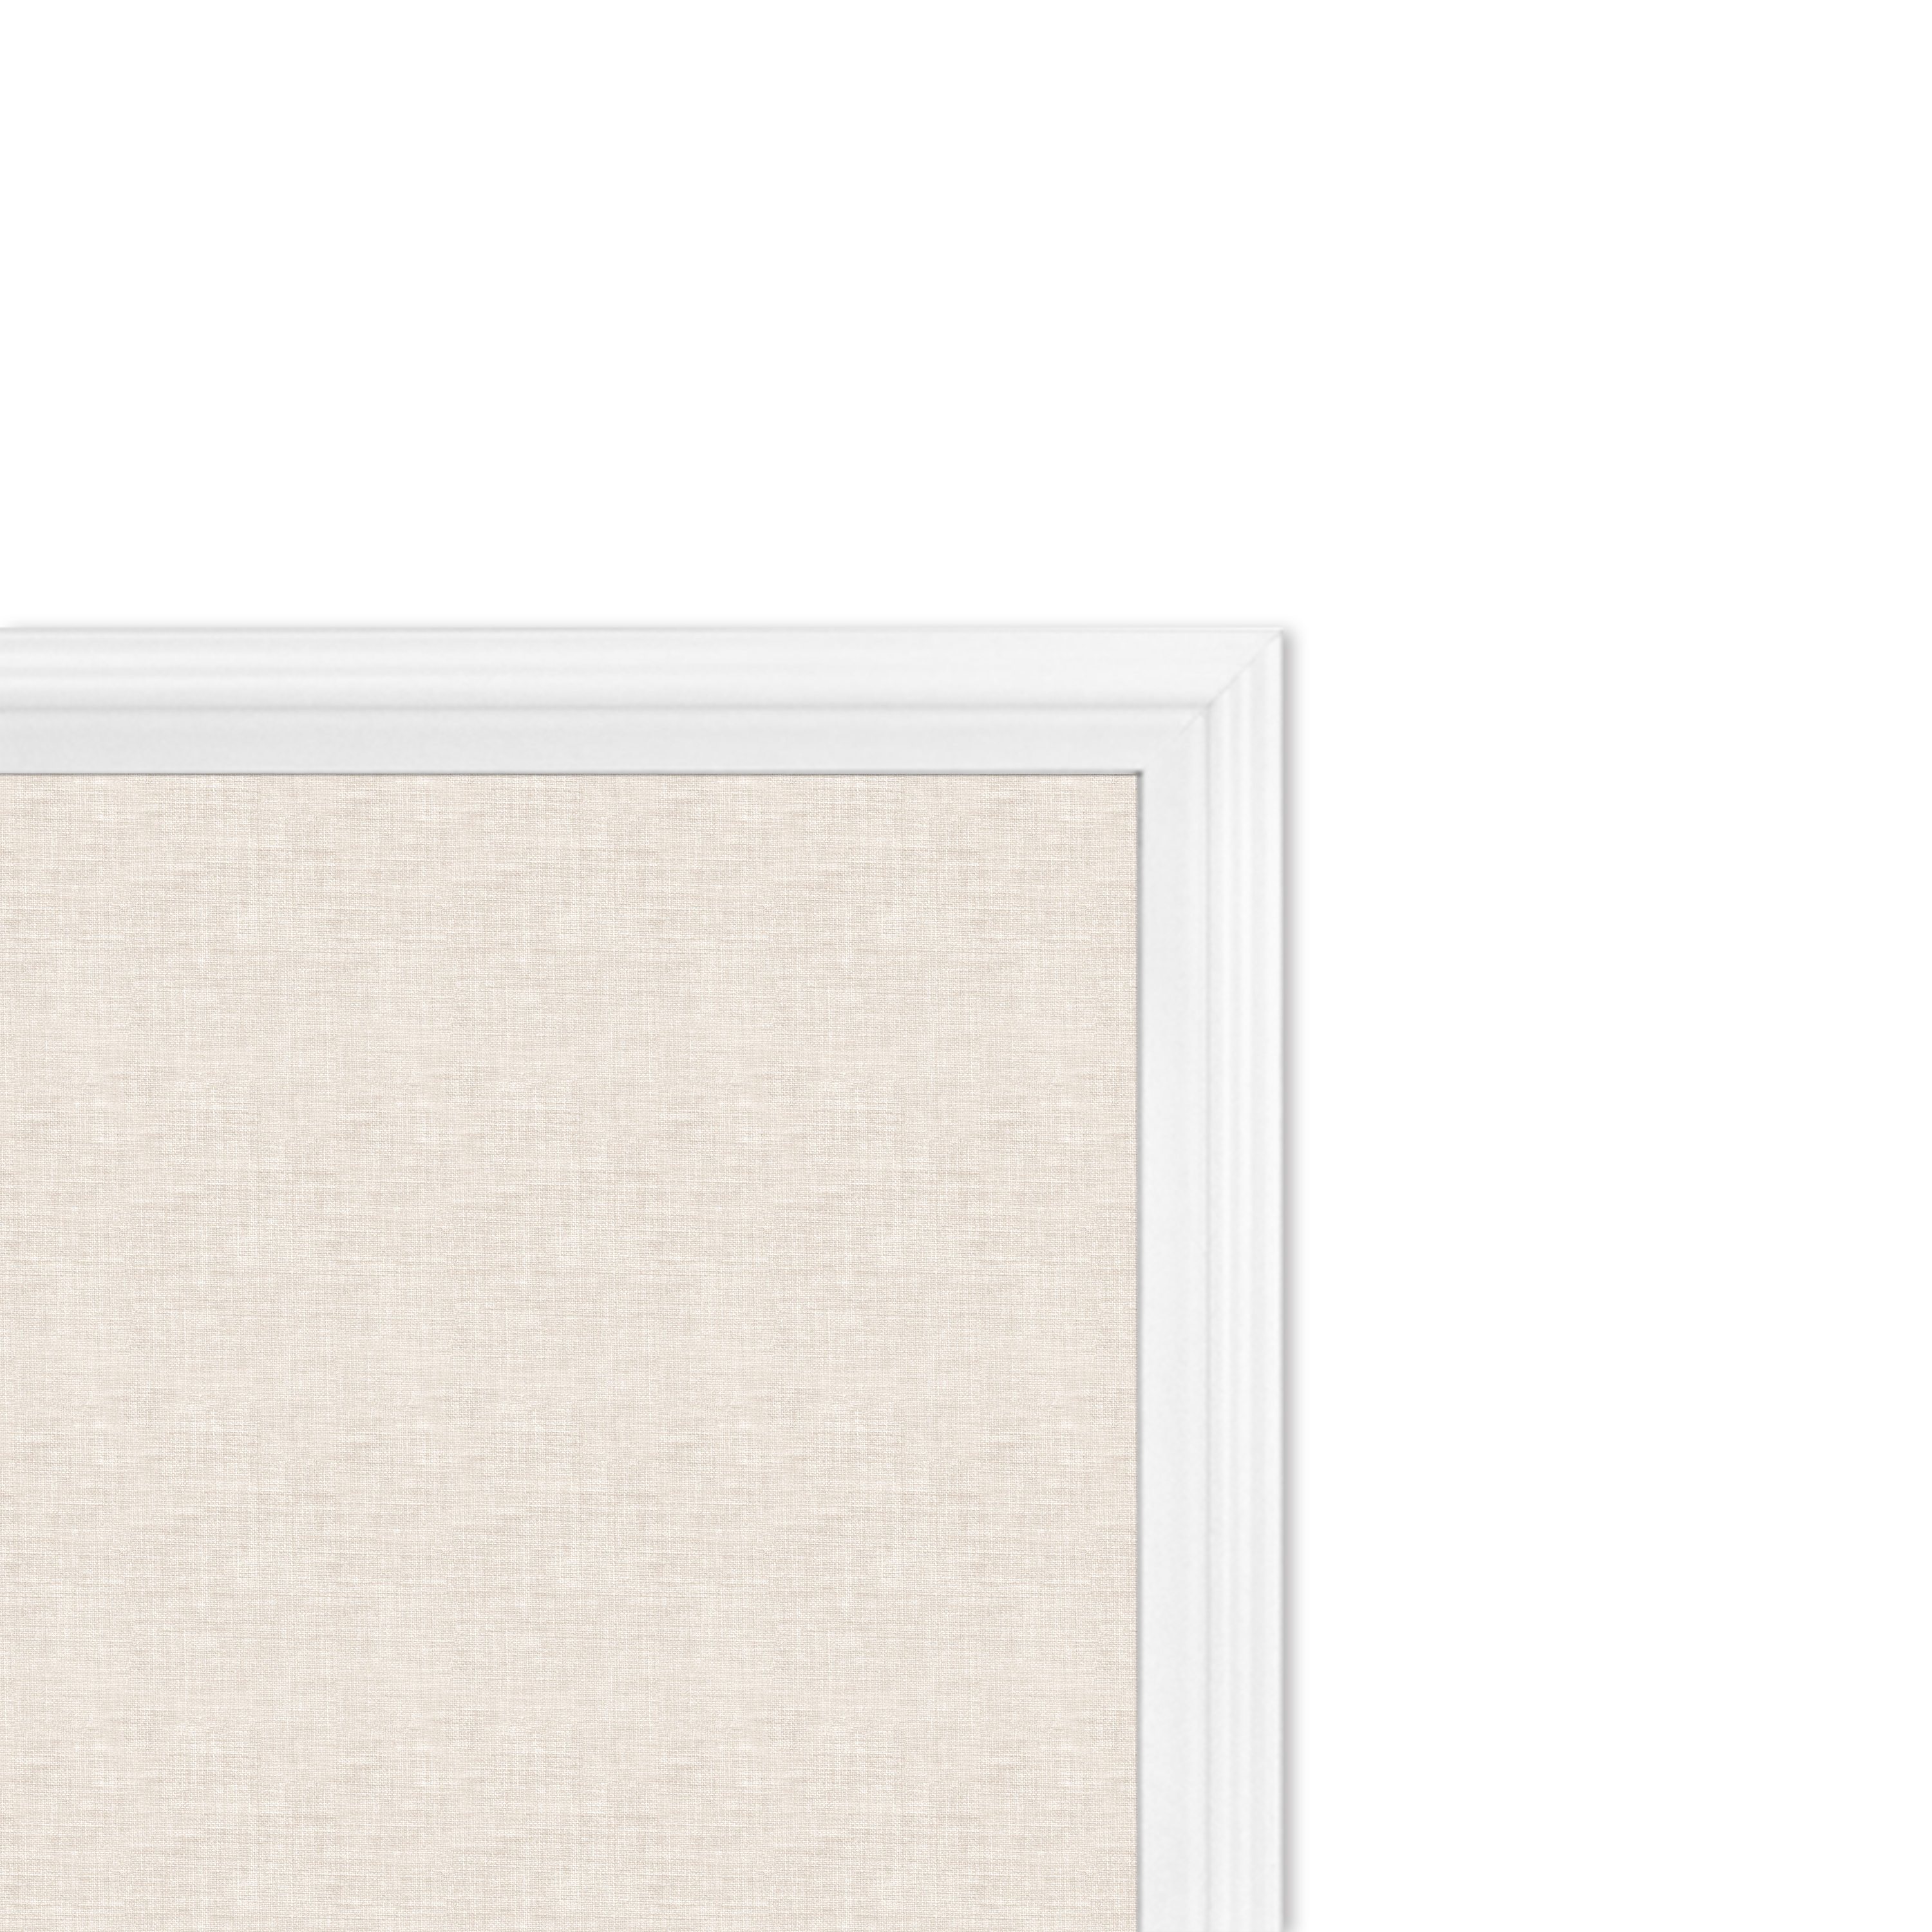 U Brands 30 x 20 in. Linen Bulletin Board with Decor Frame, Natural  White 